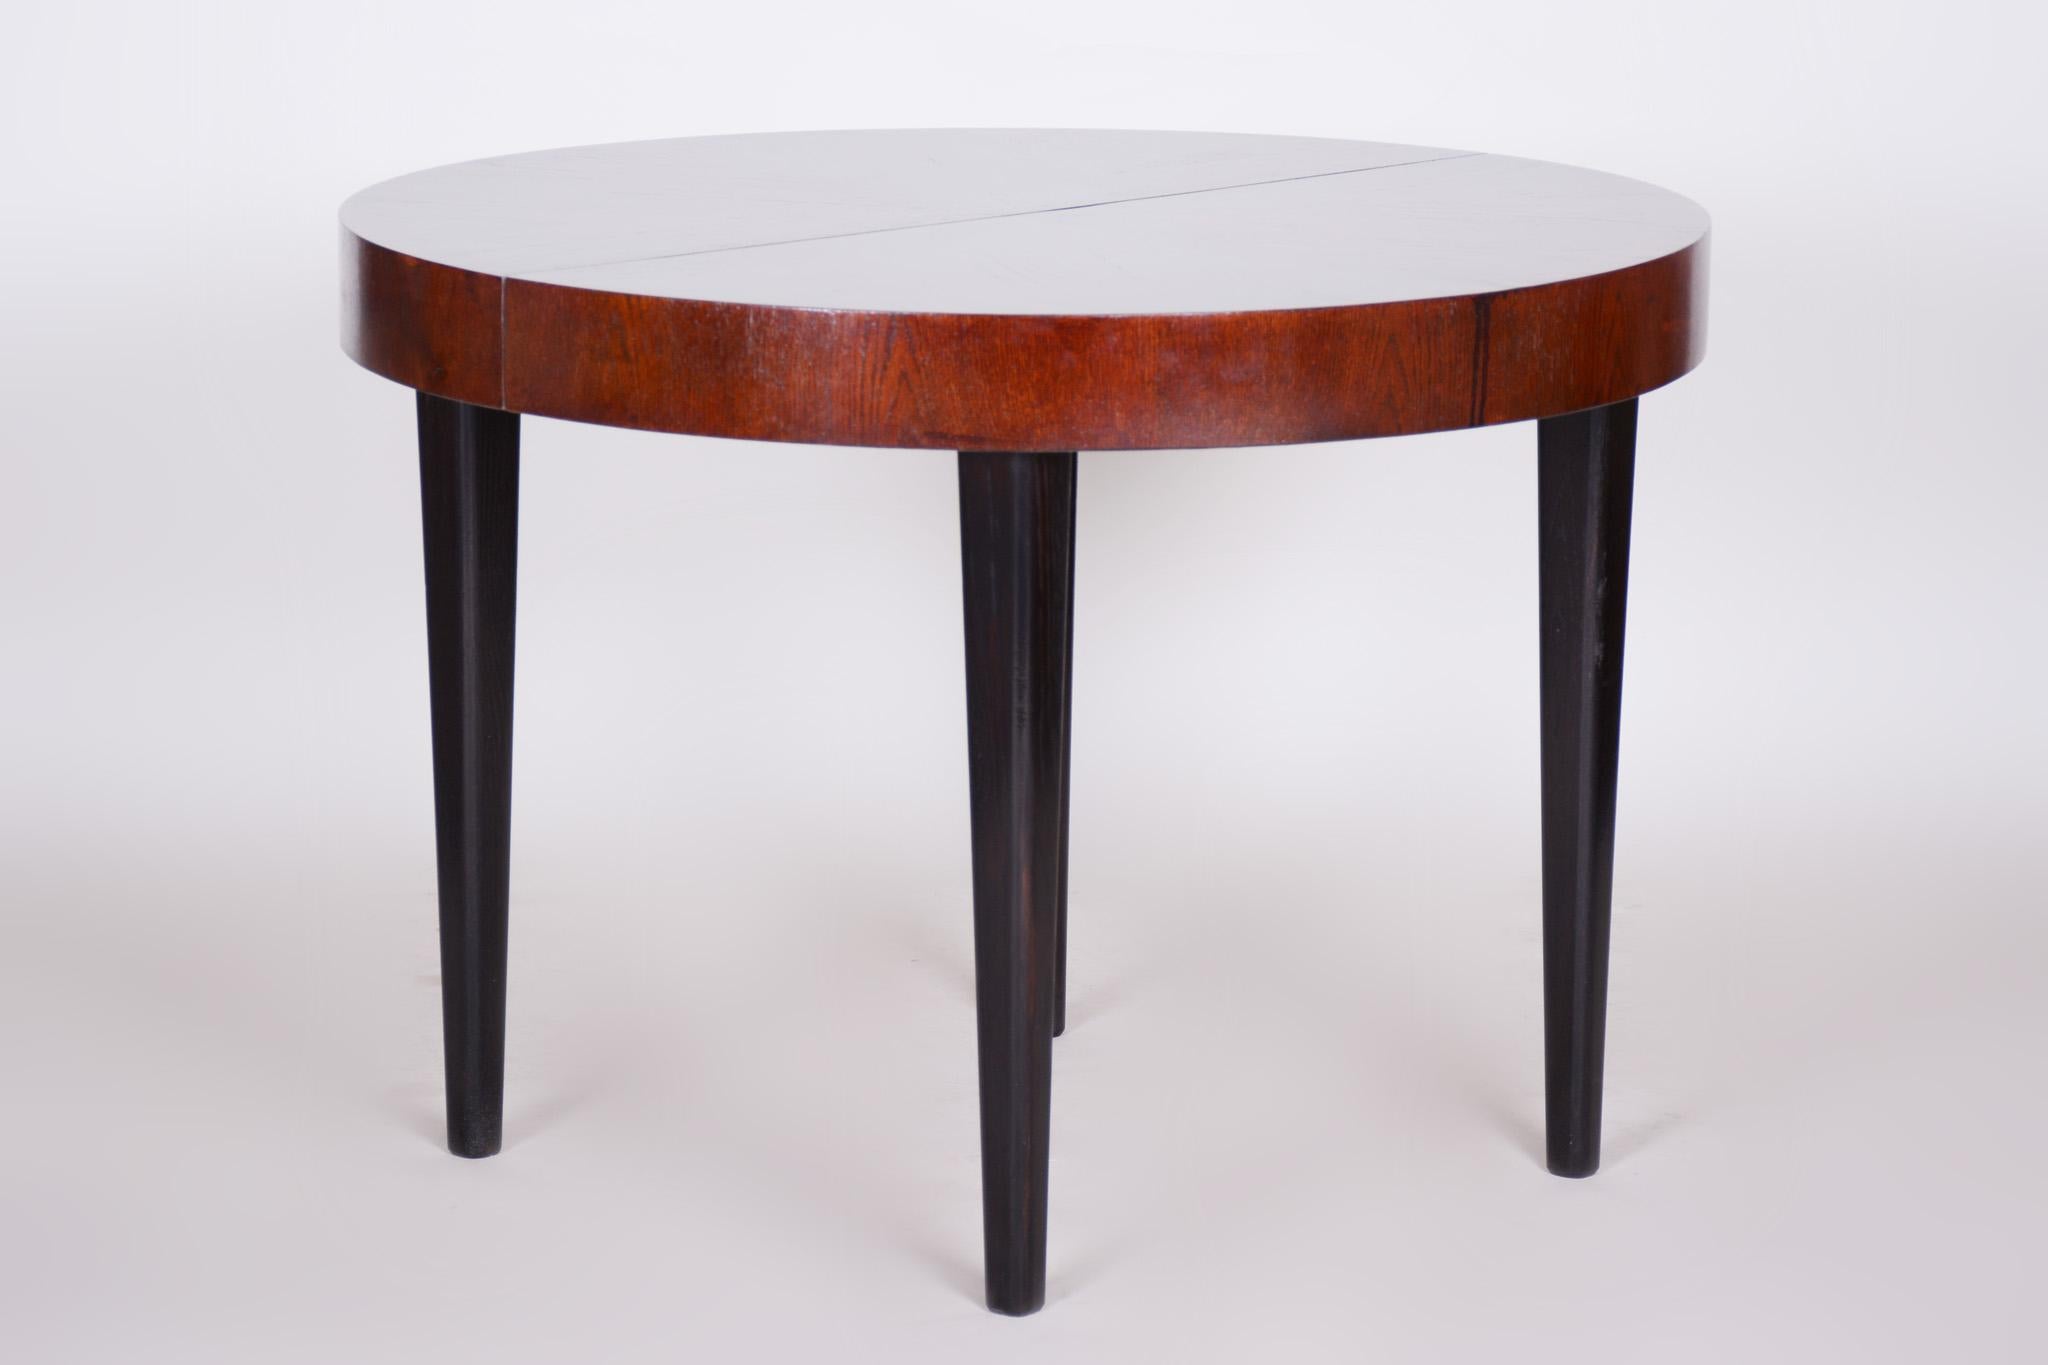 Period: 1940-1949
Condition: Fully restored 
Materials: Beech and oak 

This item features classic Art Deco elements. Art Deco is a style that originates from France in the early 20th century. Its furniture designs are meticulously crafted, usually